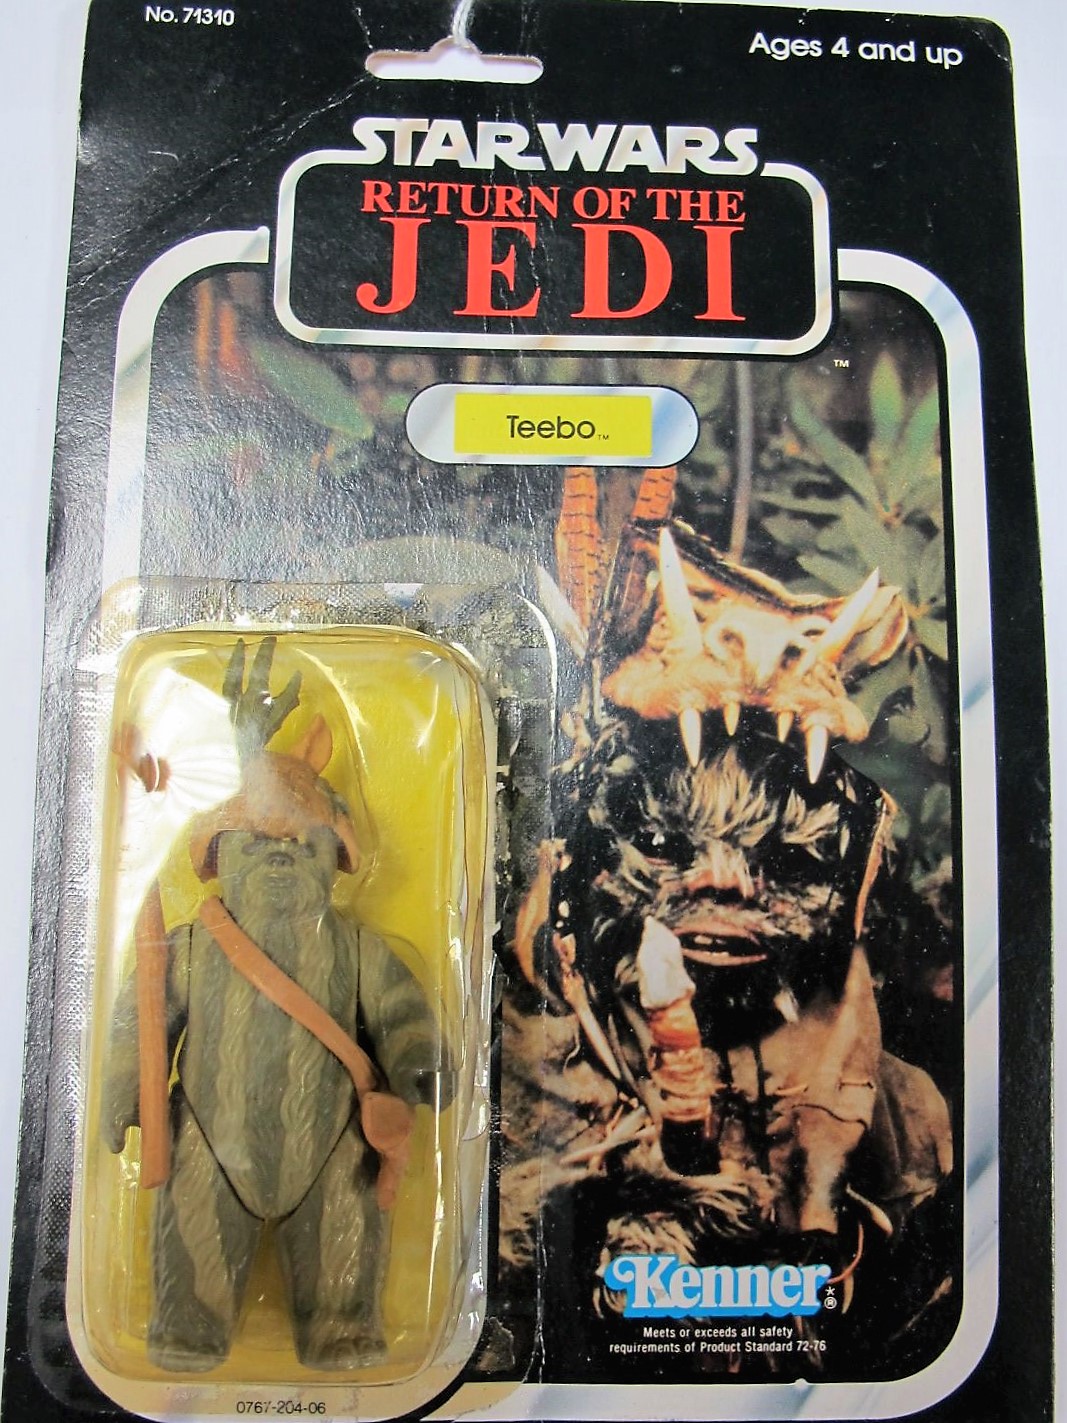 An Original Carded Star Wars Return of The Jedi Ewok Teebo Figure, by Kenner 1984, on 79 back